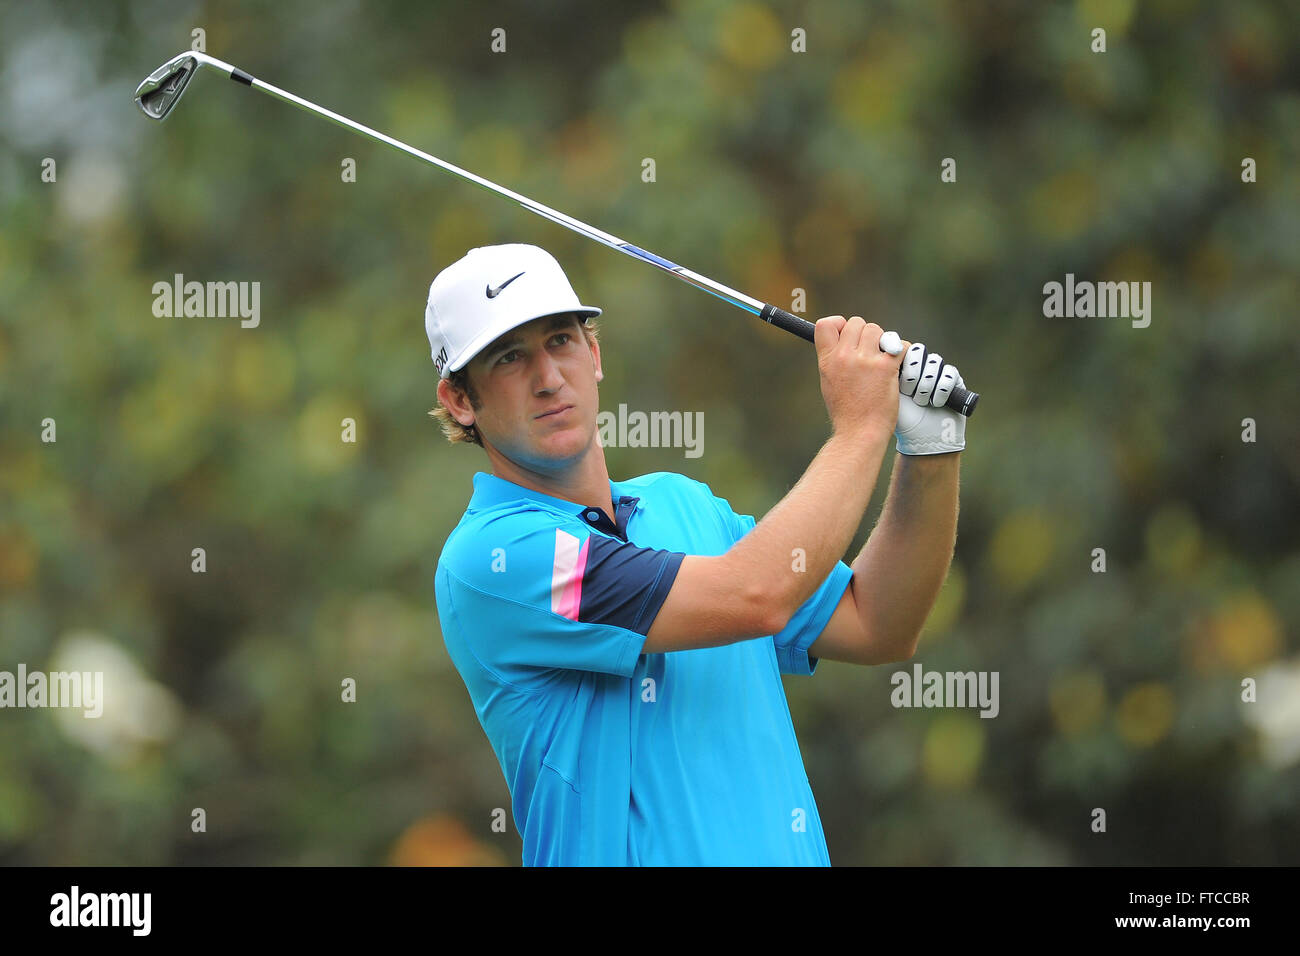 Charlotte, North Carolina, USA. 6th May, 2012. Kevin Chappell during the final round of the Wells Fargo Championship at the Quail Hollow Club on May 6, 2012 in Charlotte, N.C. ZUMA PRESS/ Scott A. Miller. © Scott A. Miller/ZUMA Wire/Alamy Live News Stock Photo